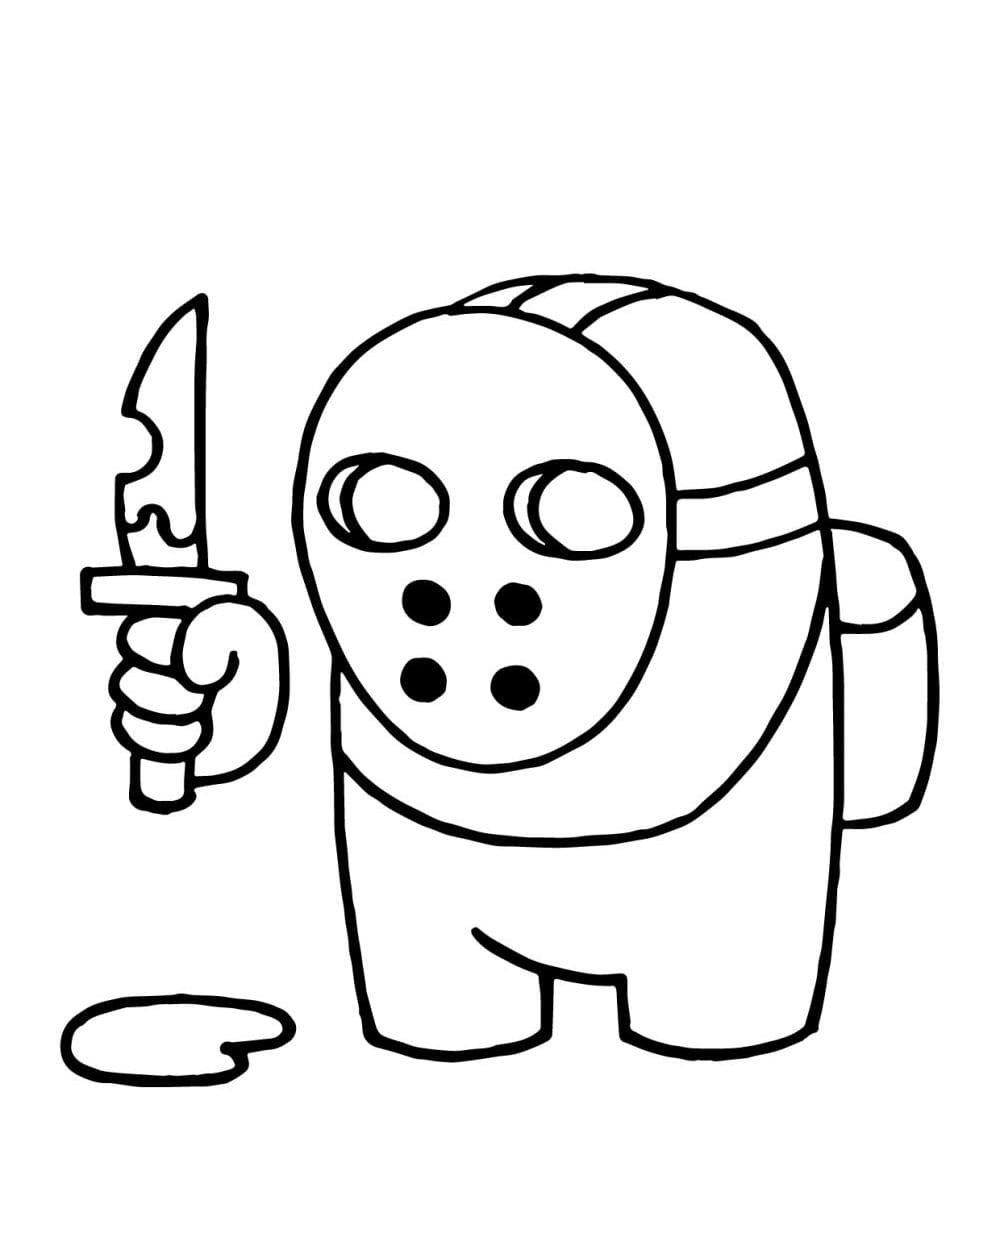 Coloring page Among Us A masked Imposter with a knife